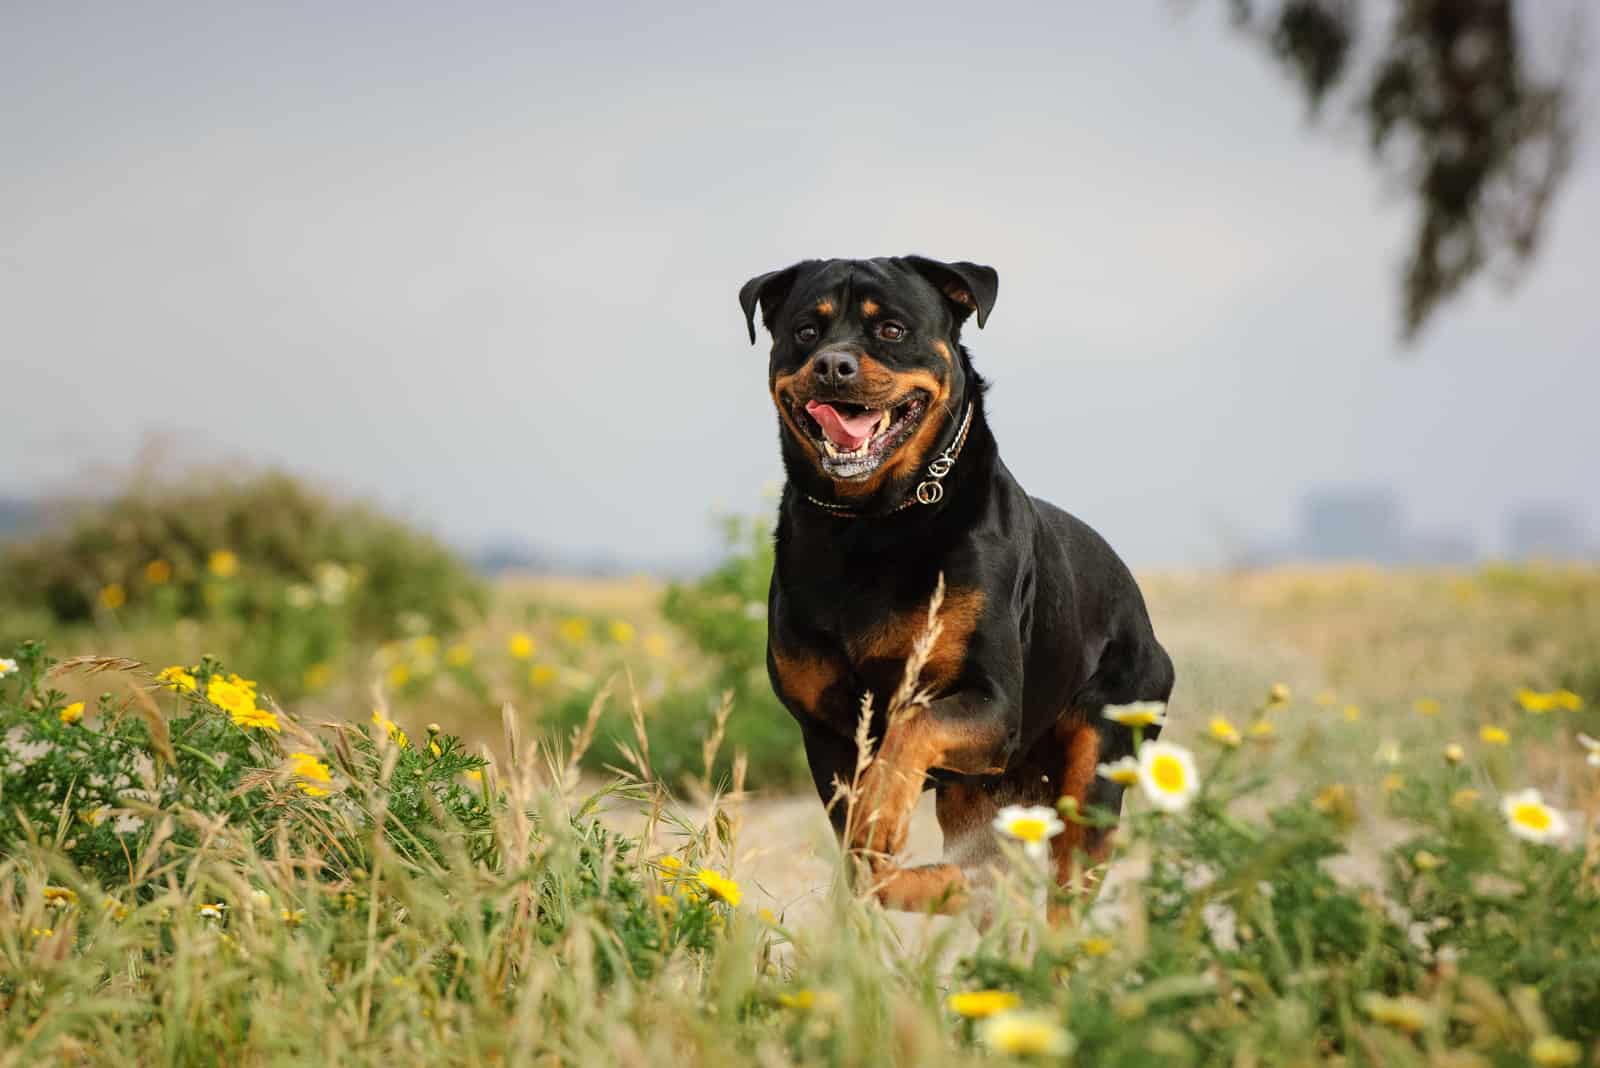 American Rottweiler Vs German Rottweiler: Are They Different?